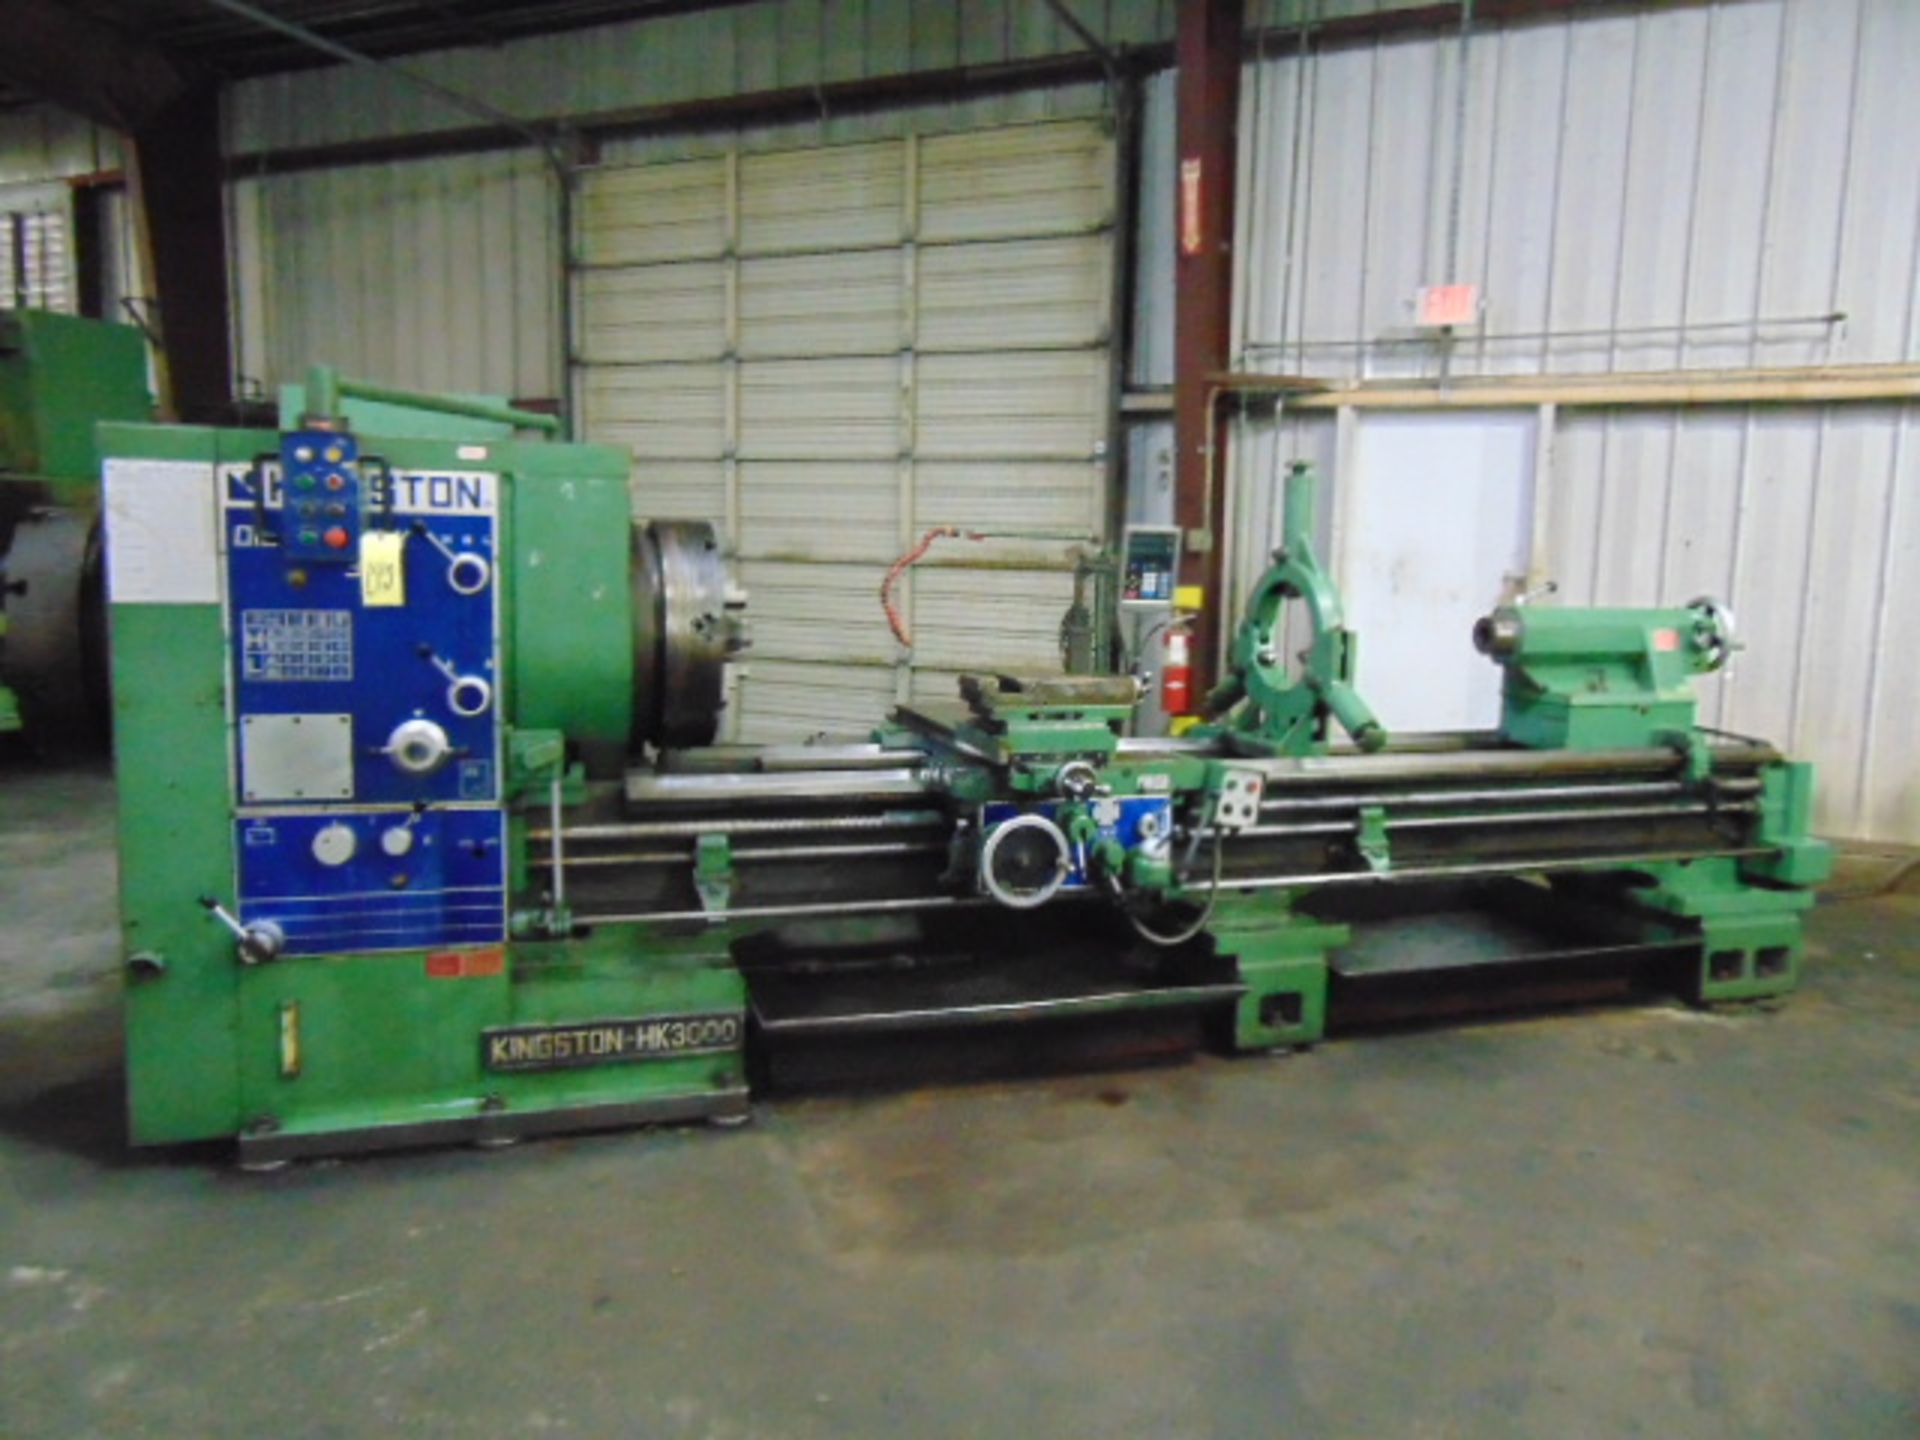 HOLLOW SPINDLE LATHE, KINGSTON 30” X 120” MDL. HK3000 OIL COUNTRY, new 2007, 30” sw. over bed, 20.